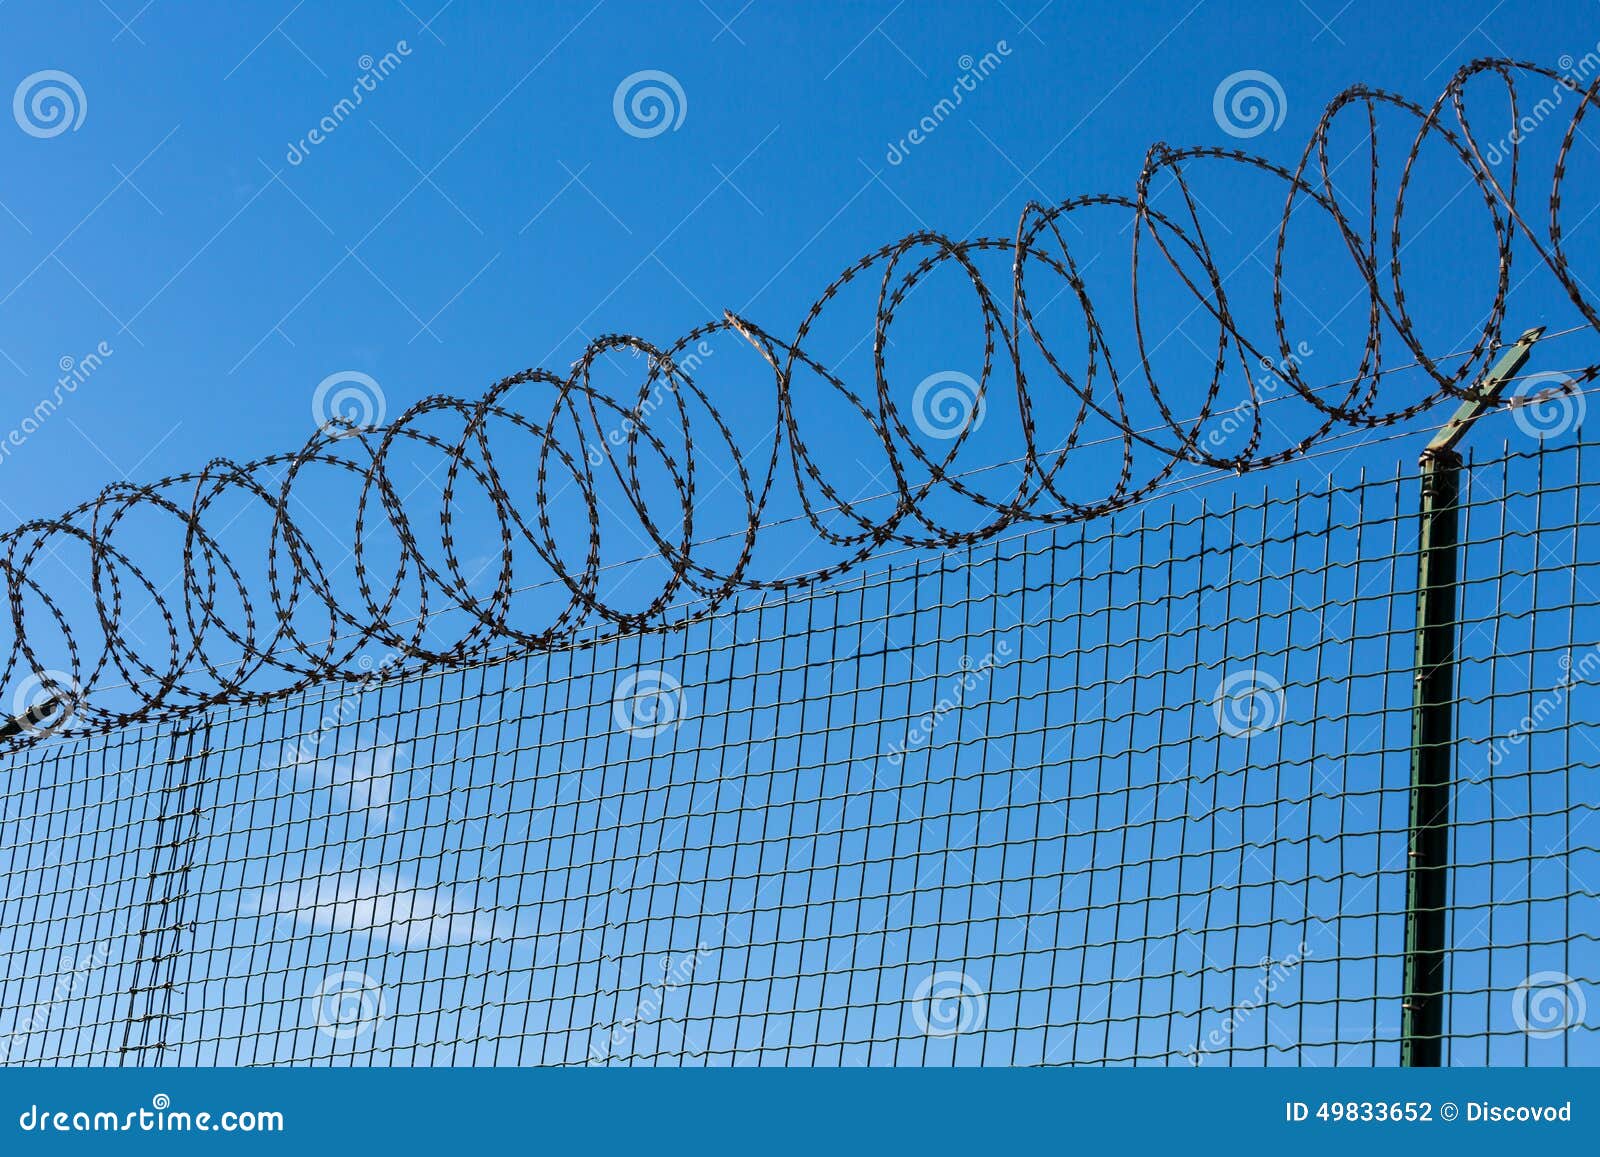 Wired Fence with Spiral Barbwire on Blue Sky Background